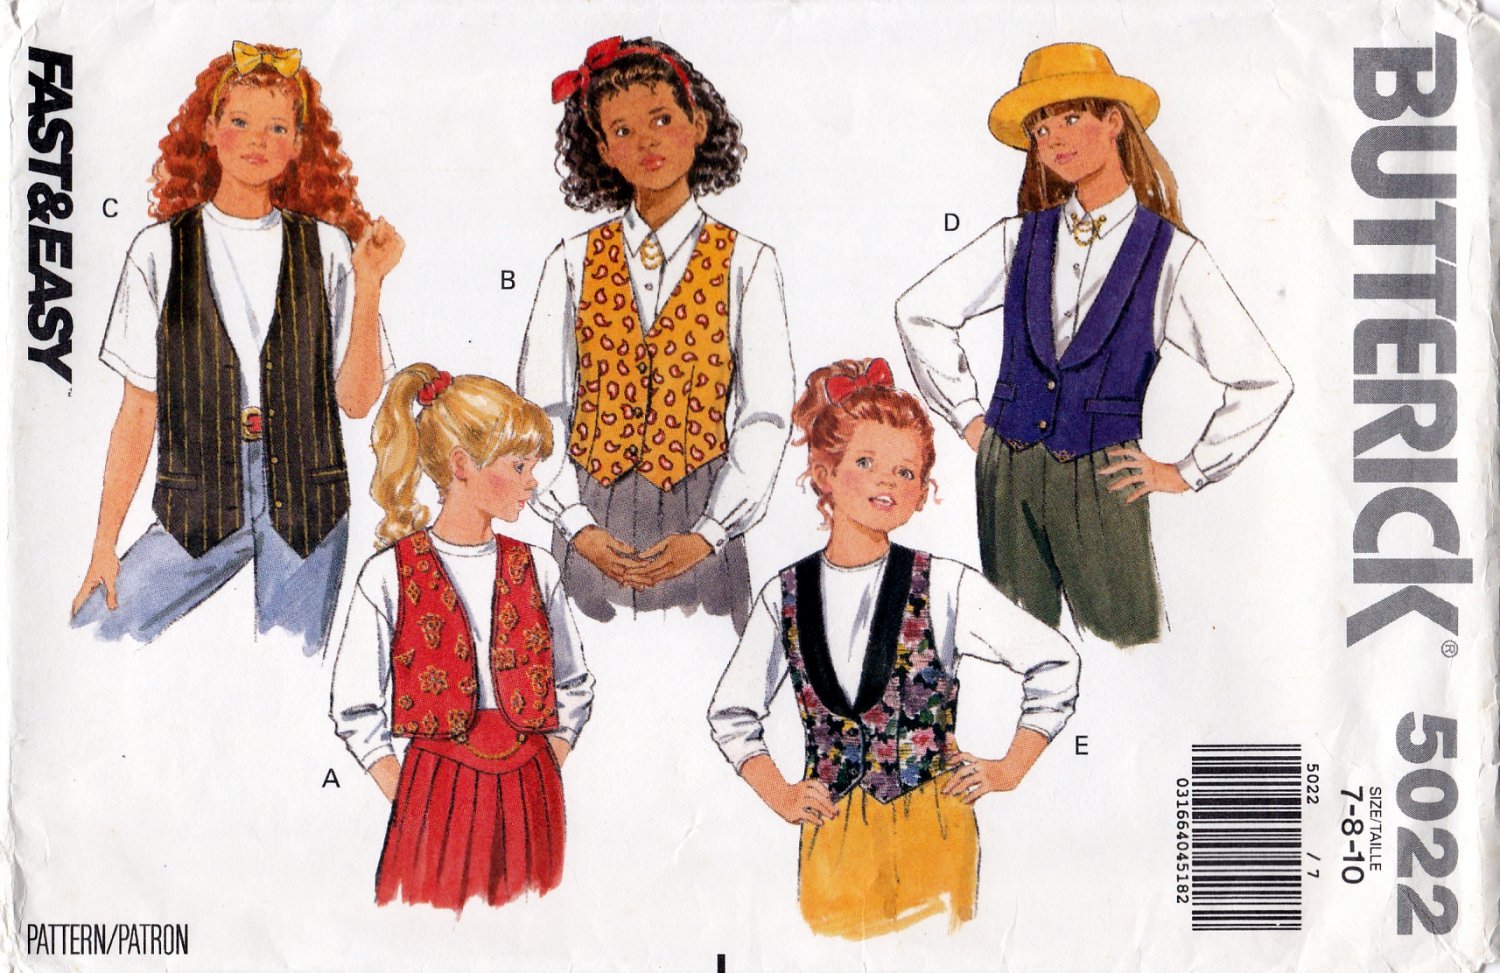 Butterick 5022 Girls Lined Vests Neckline Variations Sewing Pattern Sizes 7-8-10